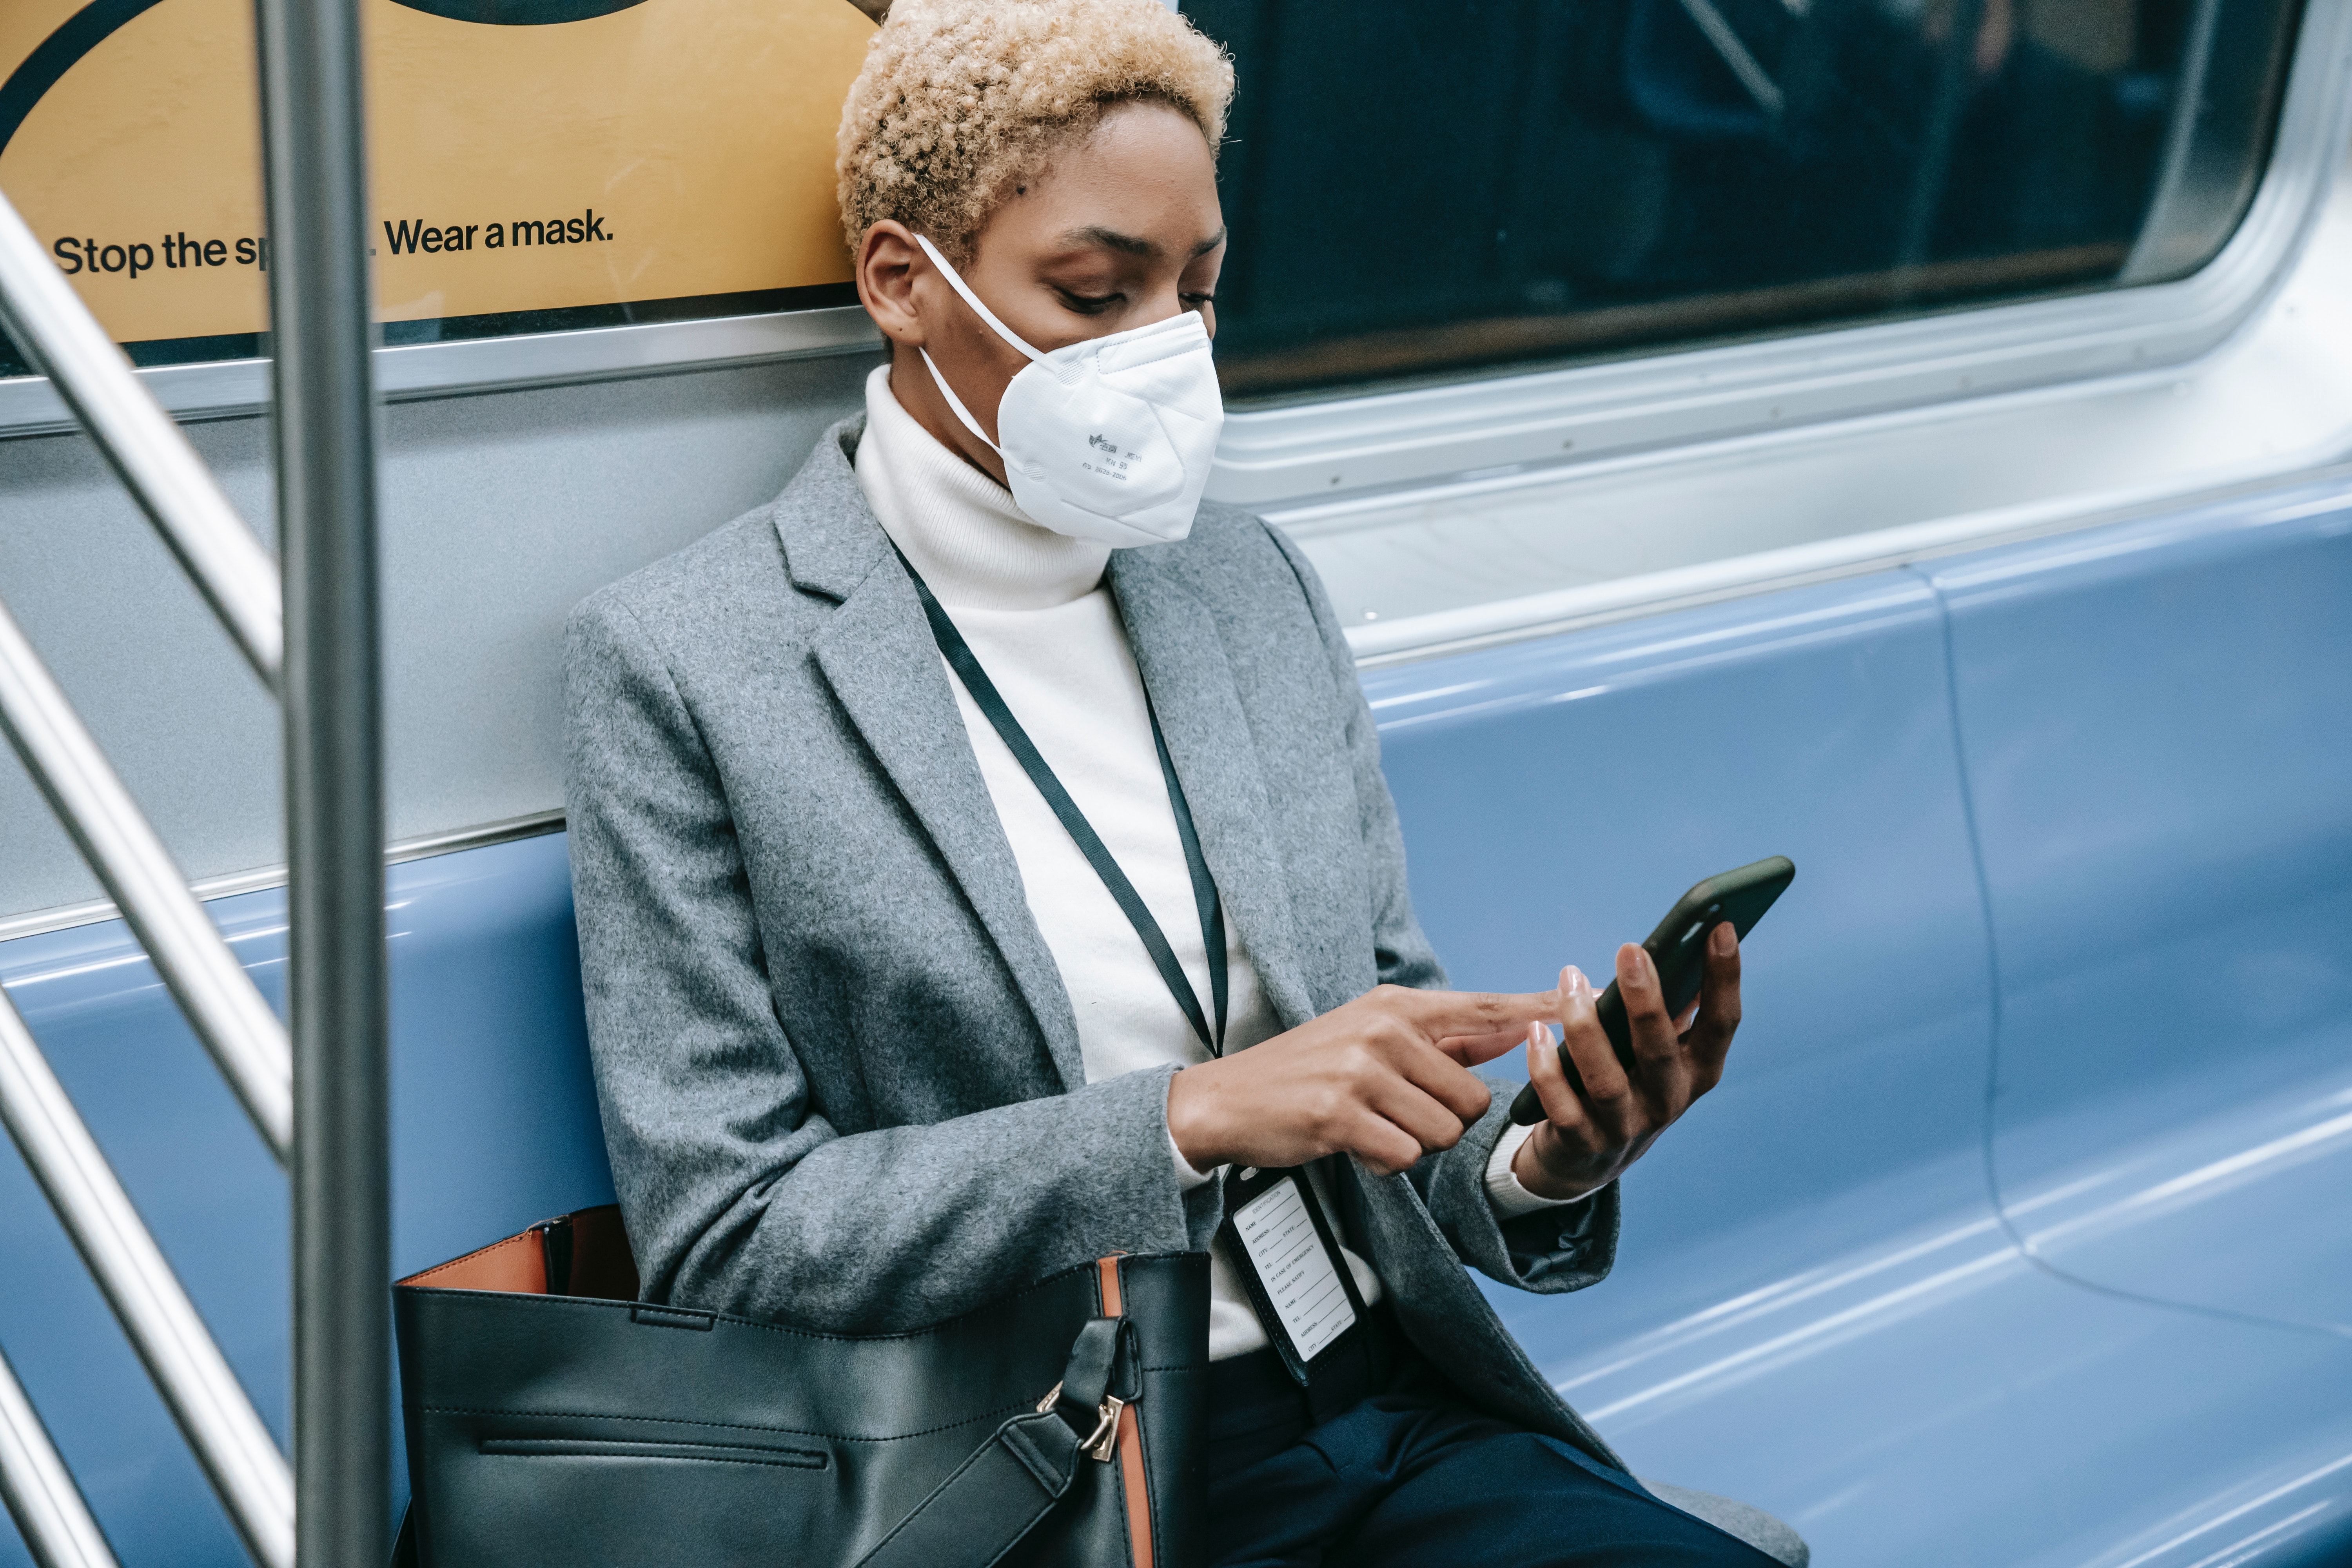 Woman in mask on subway